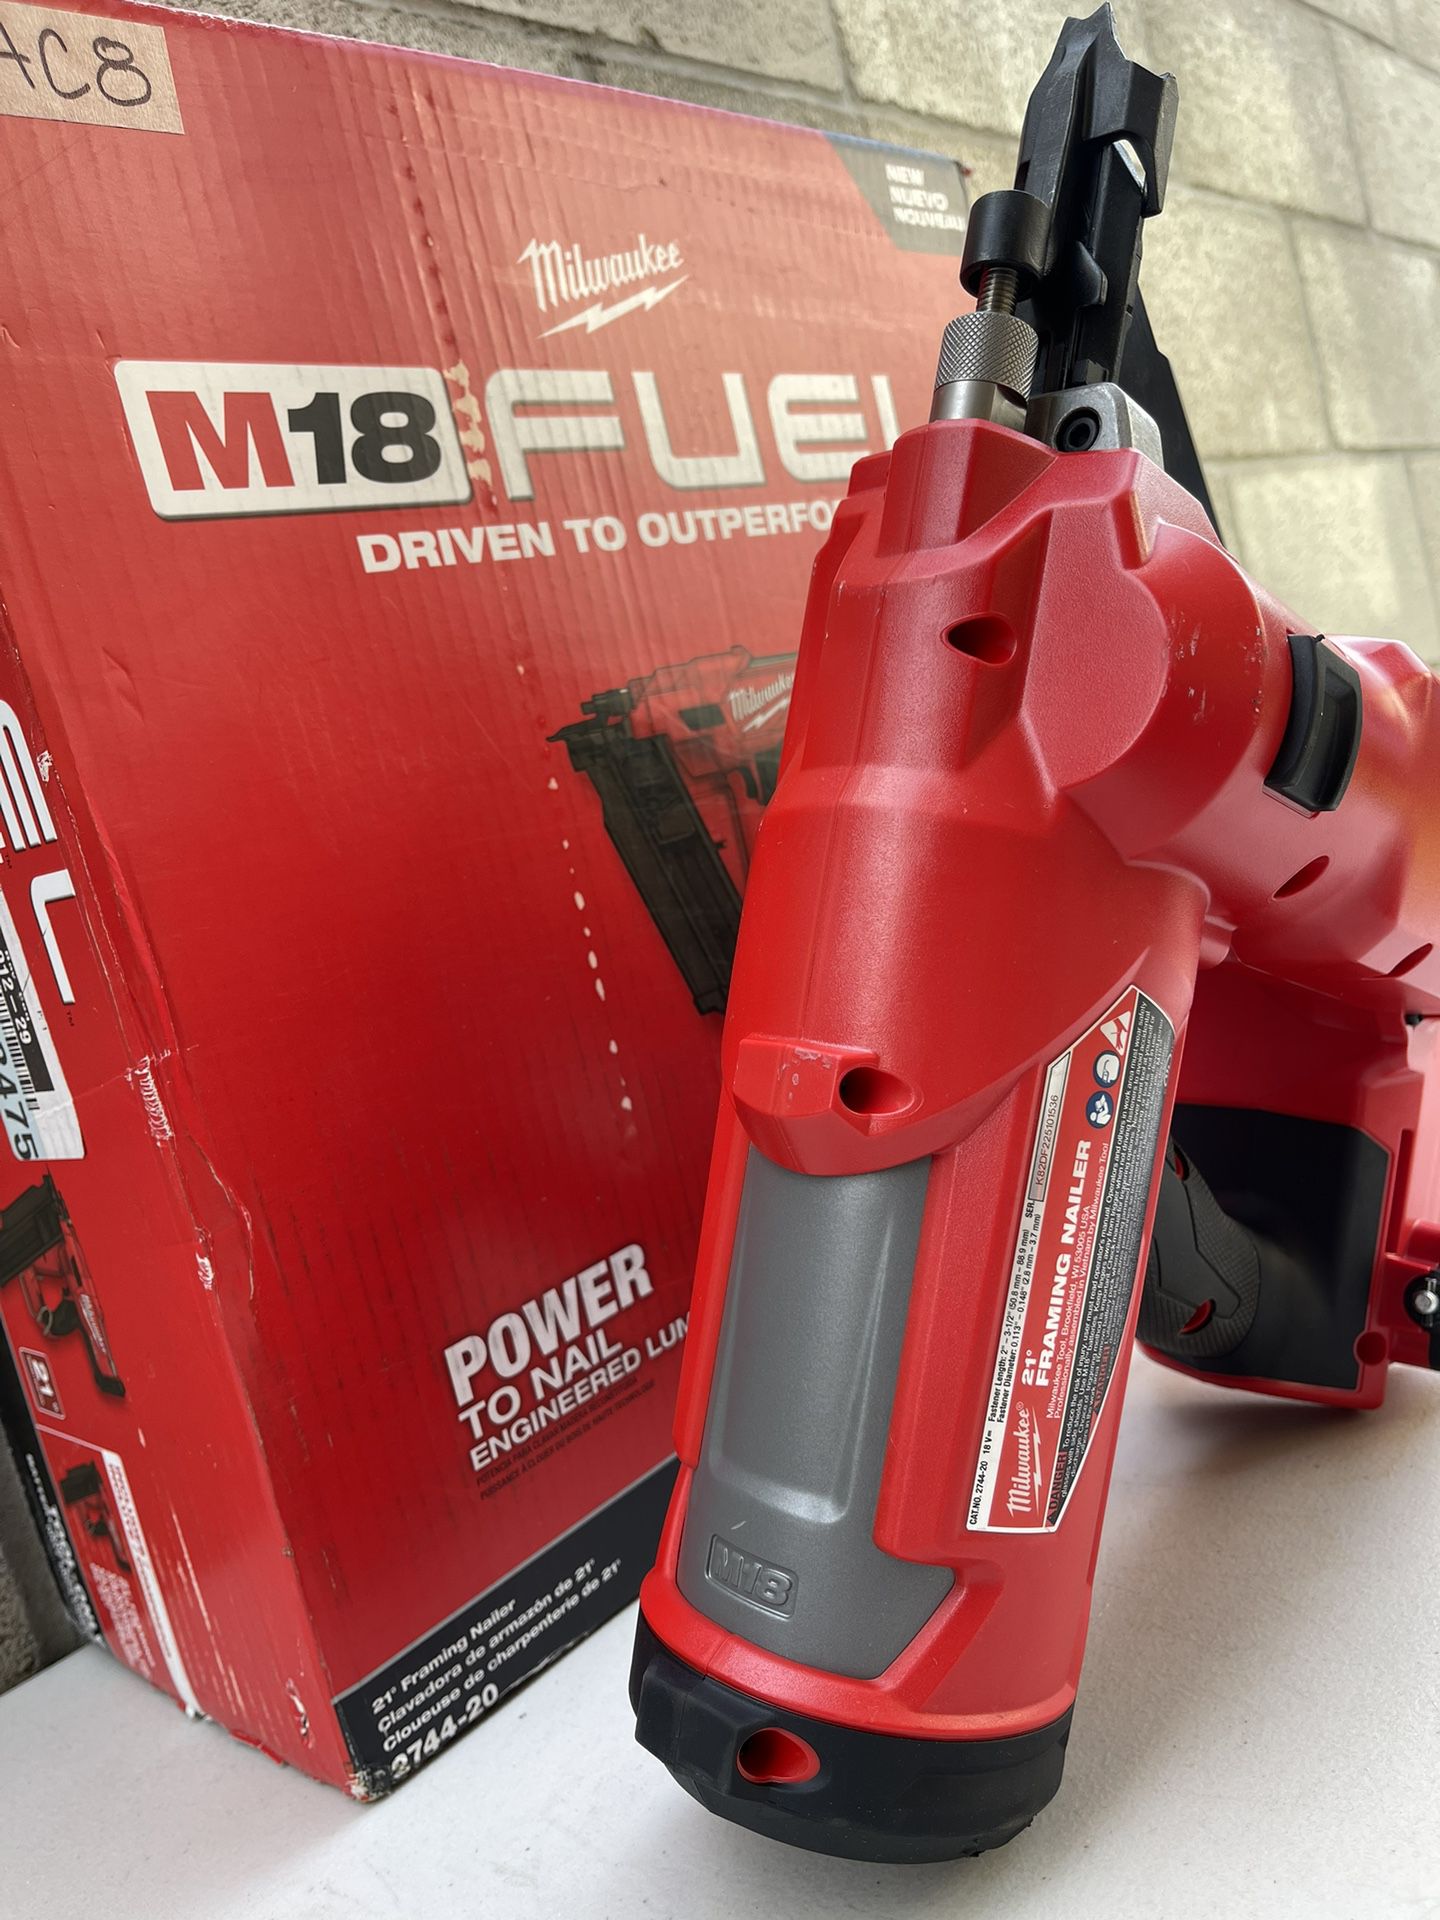 Milwaukee M18 FUEL 3-1/2 in. 18-Volt 21-Degree Framing Nailer (Tool-Only)